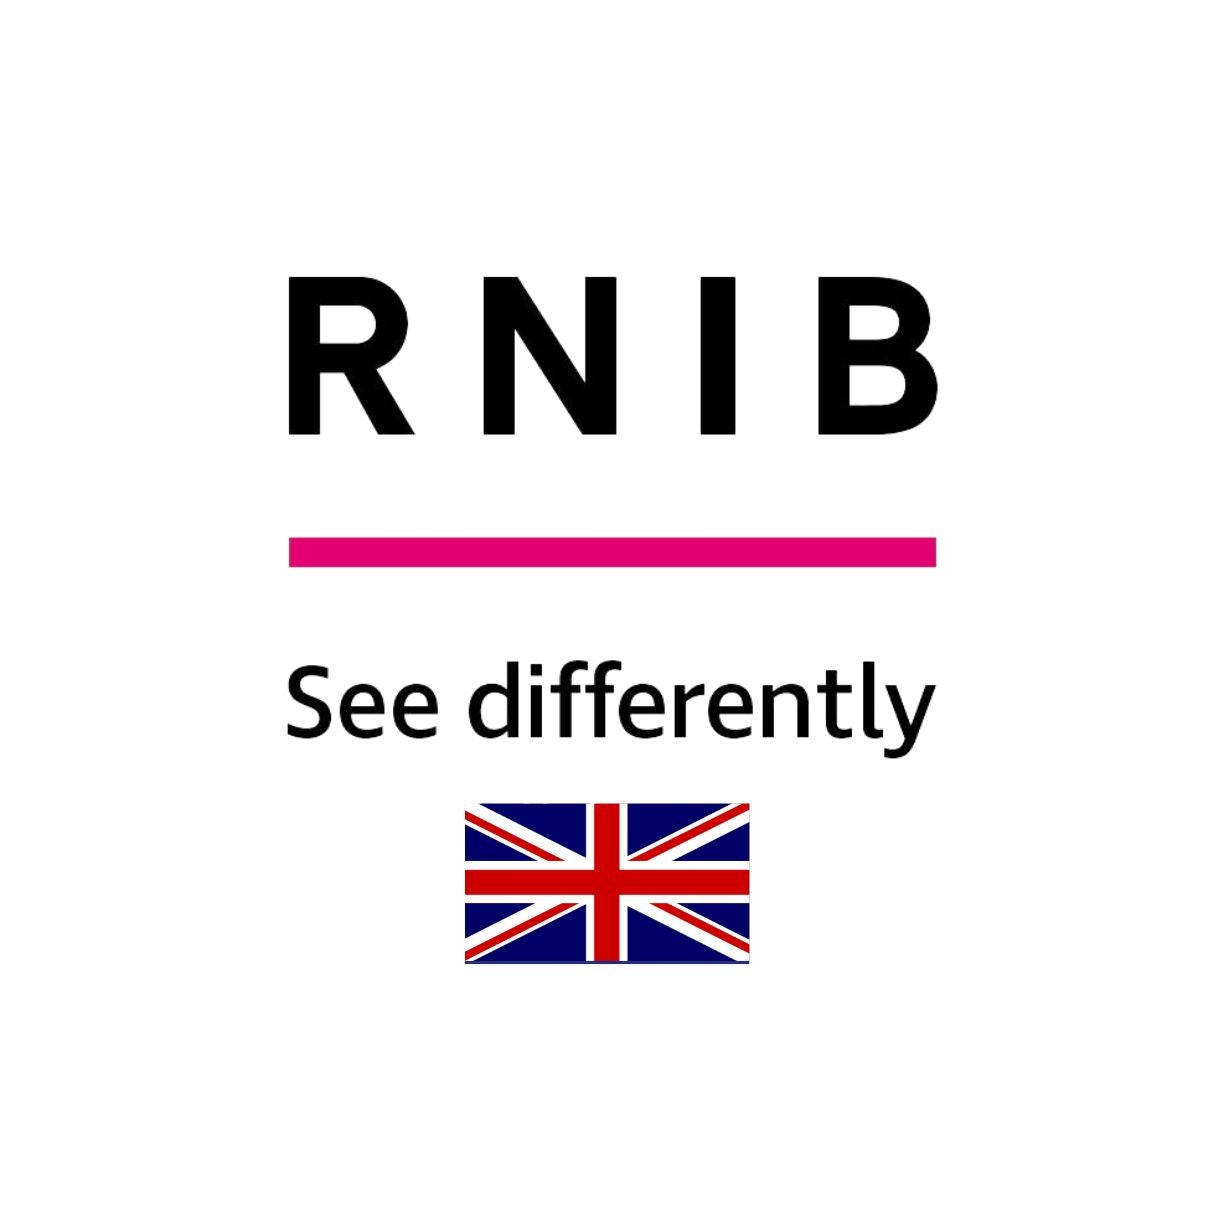 Royal National Institute of Blind People RNIB Logo and England flag